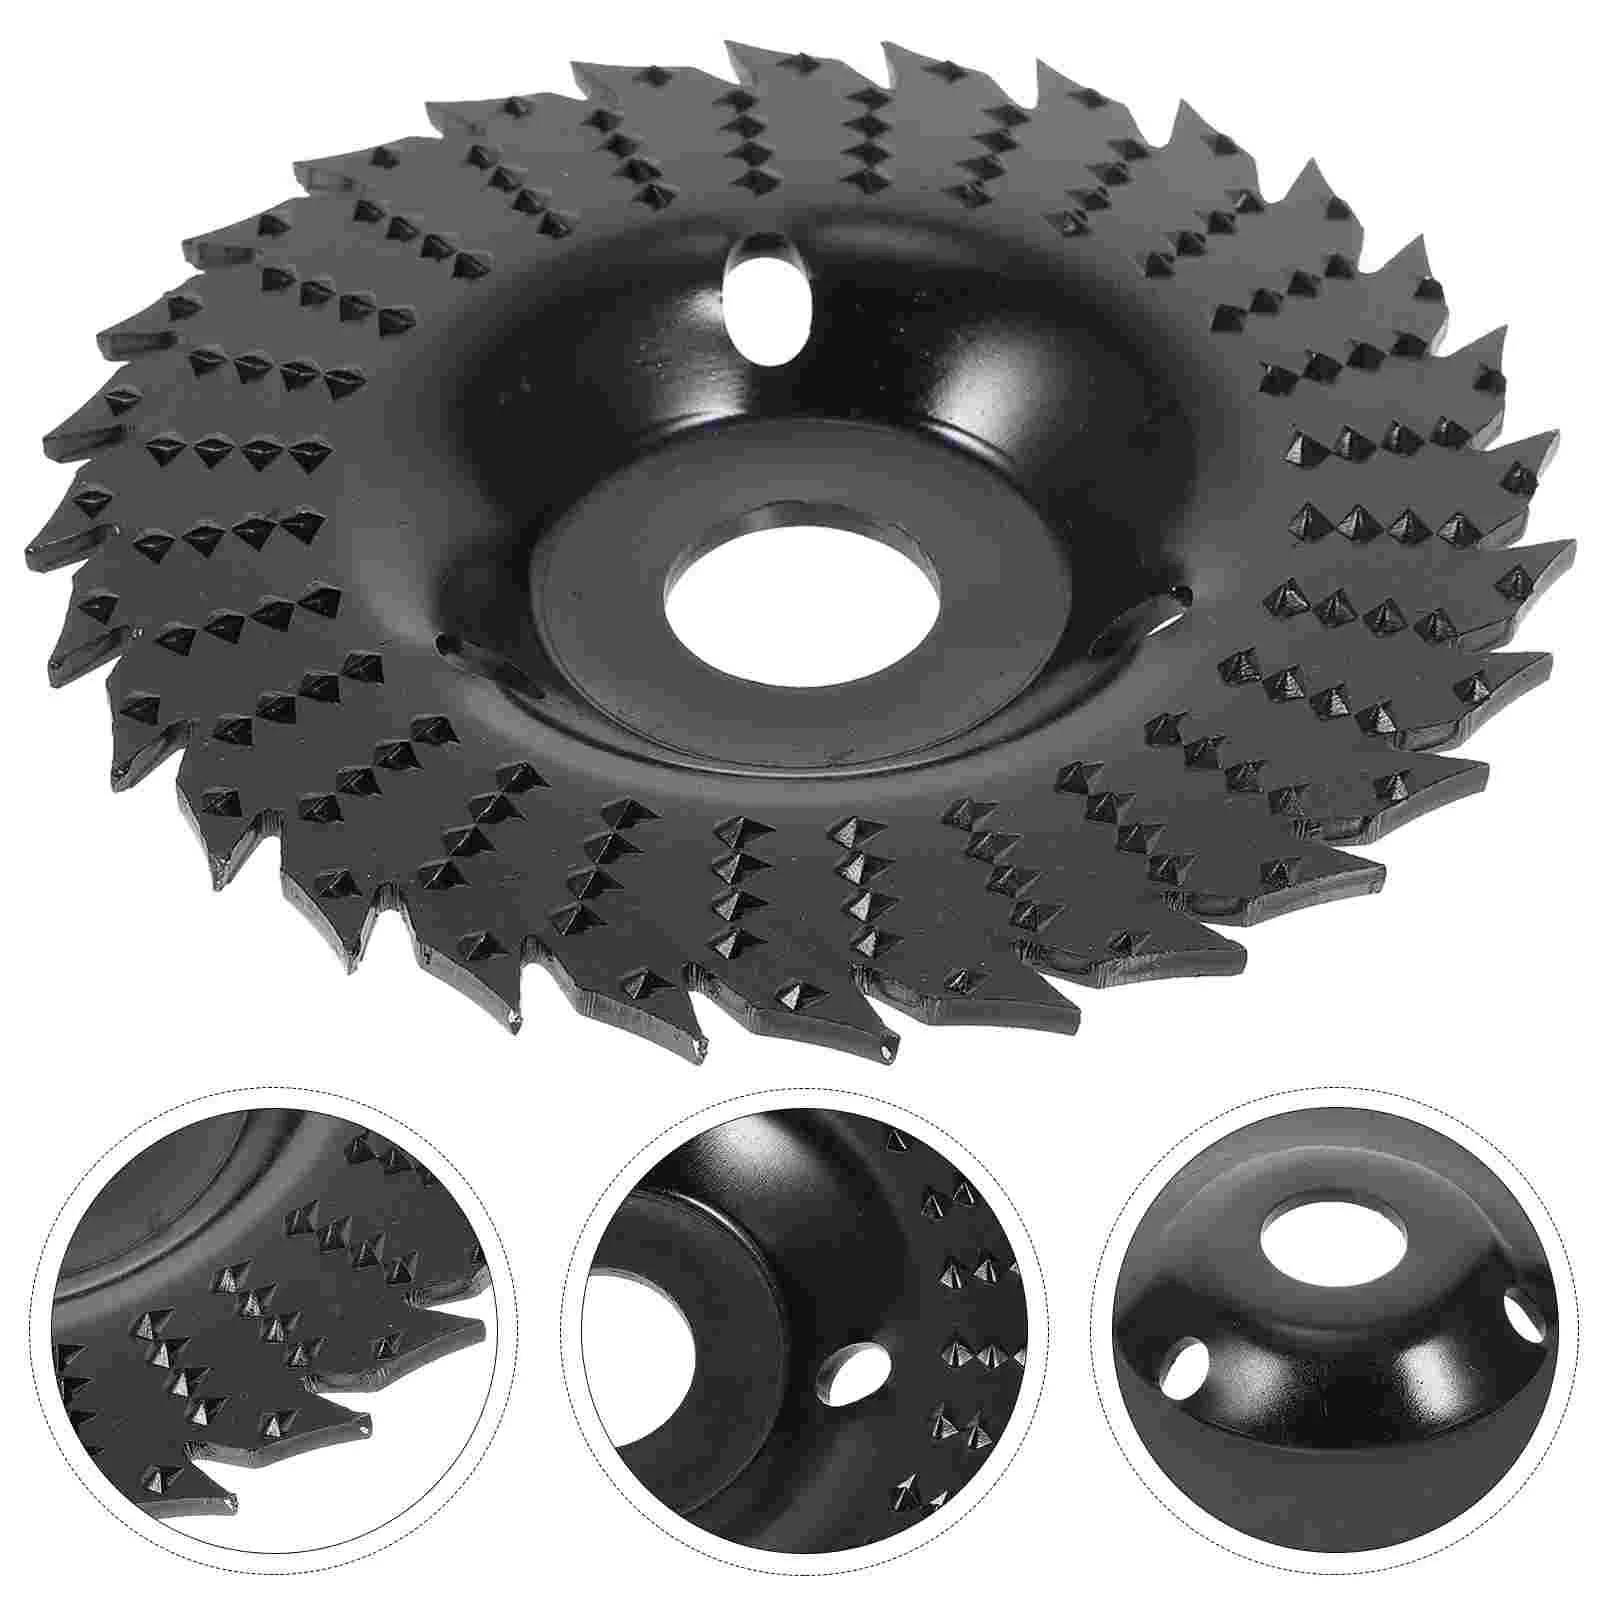 Stump Grinder Shaping Disc Wood Cutting Carpentry Tools Wood Carving Disc Angle Grinder Attachments Wood Carving Tools